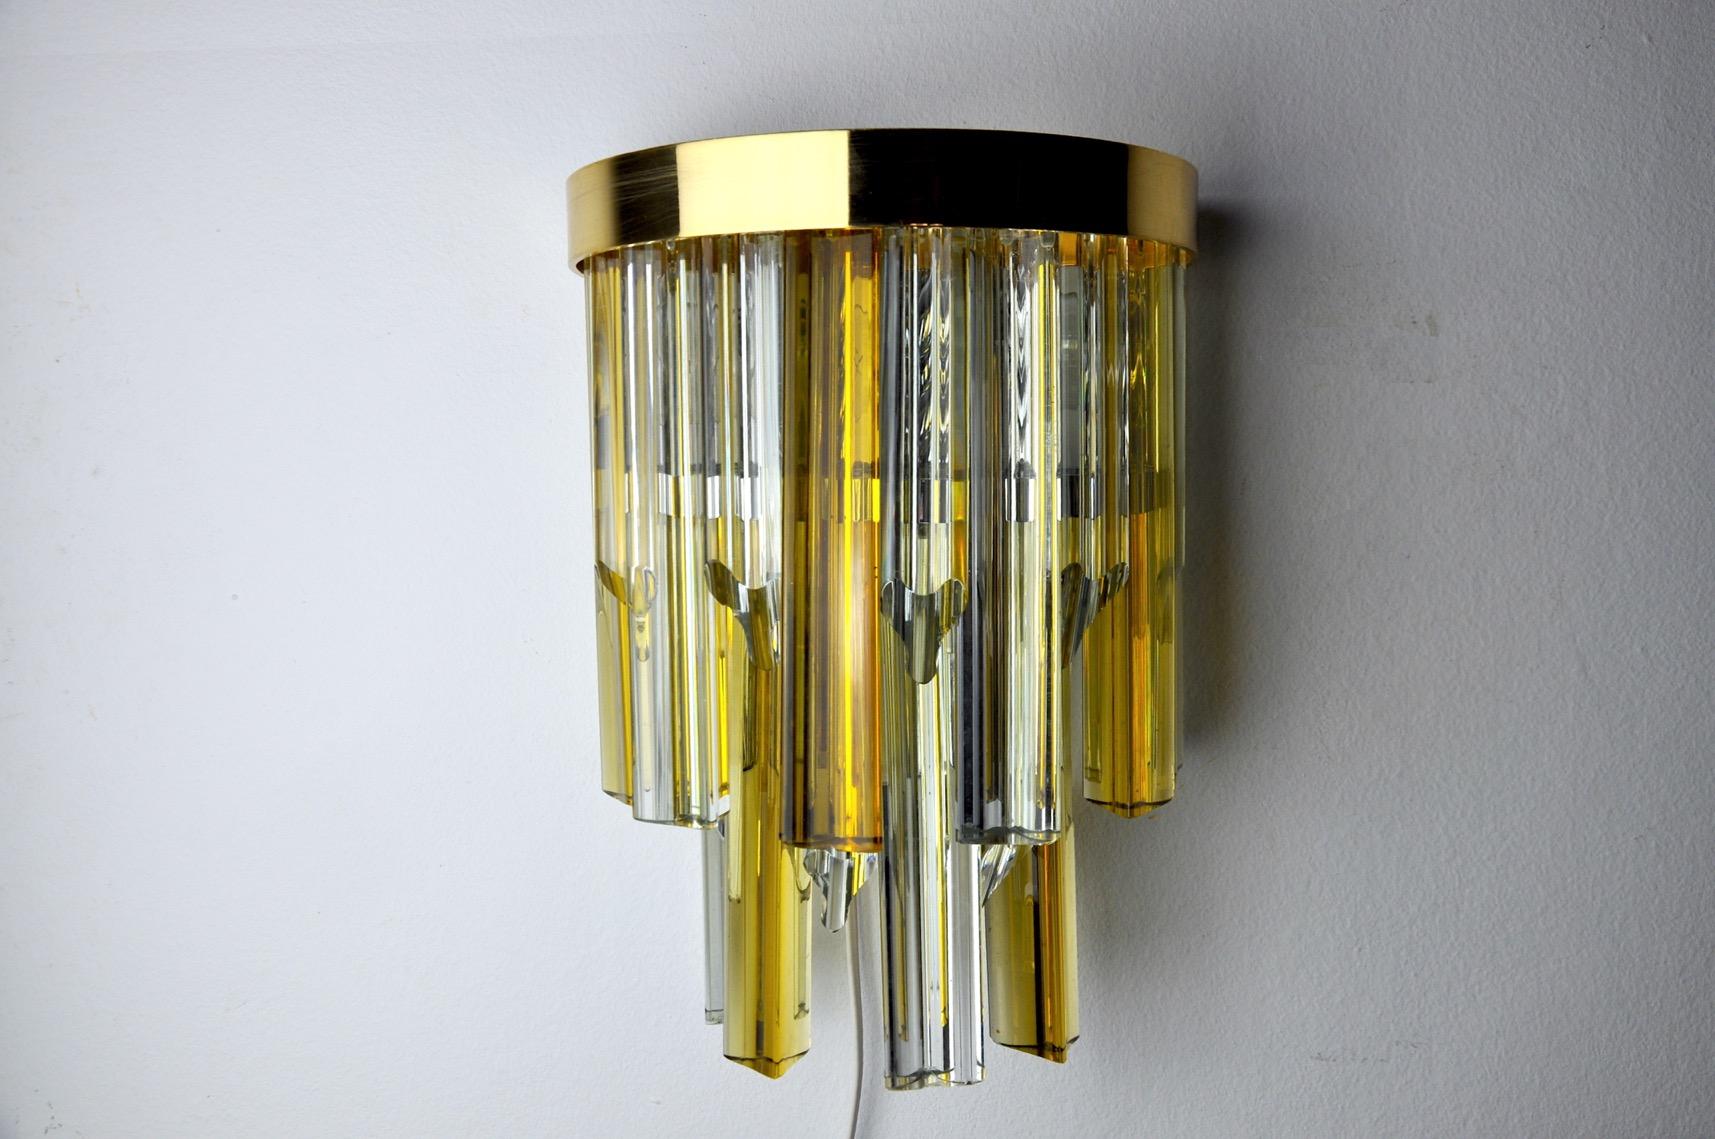 Rare and large sconce attributed to Paolo Venini two-tone dating from the 70s. Murano glass and golden metal structure. Unique object that will illuminate and bring a real design touch to your interior. Electricity verified, mark of time relative to